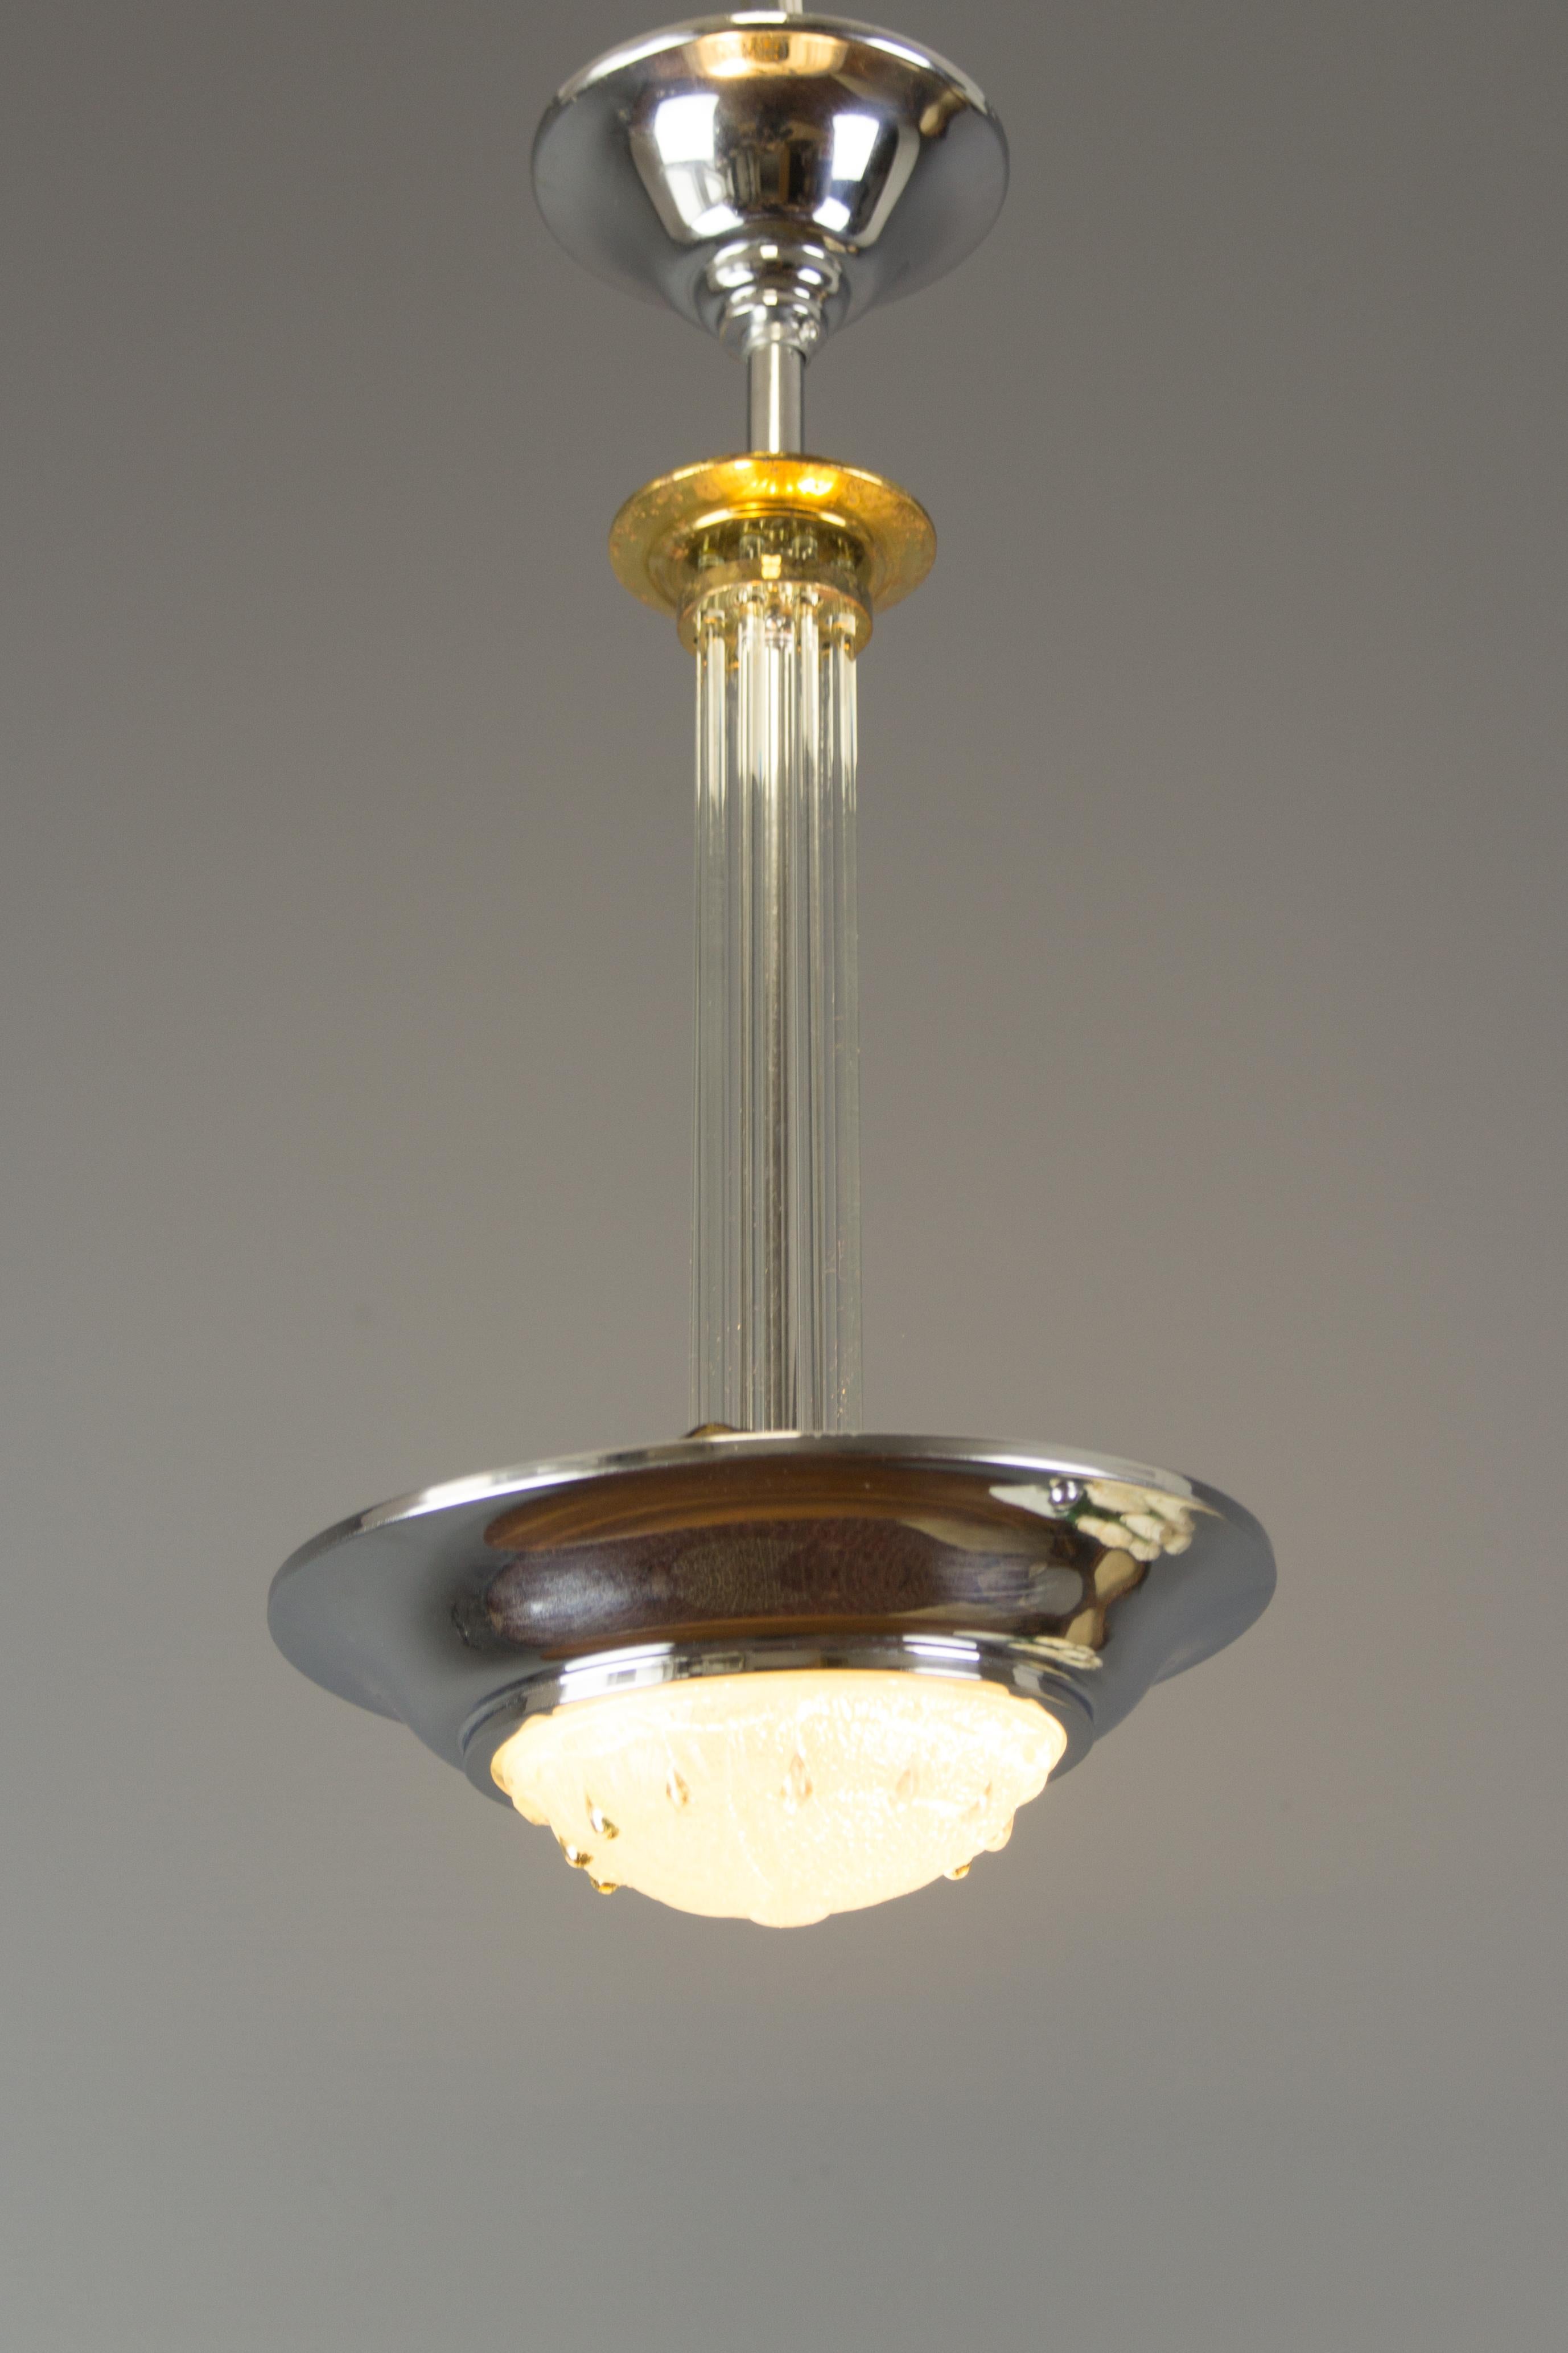 French Art Deco chandelier/pendant light features a chromed brass frame with an Ezan-style relief glass dome and glass rods center. Two sockets for B22 size light bulbs.
Dimensions: Diameter 25 cm / 9.84 in, height 51 cm / 20.07 in.
The light